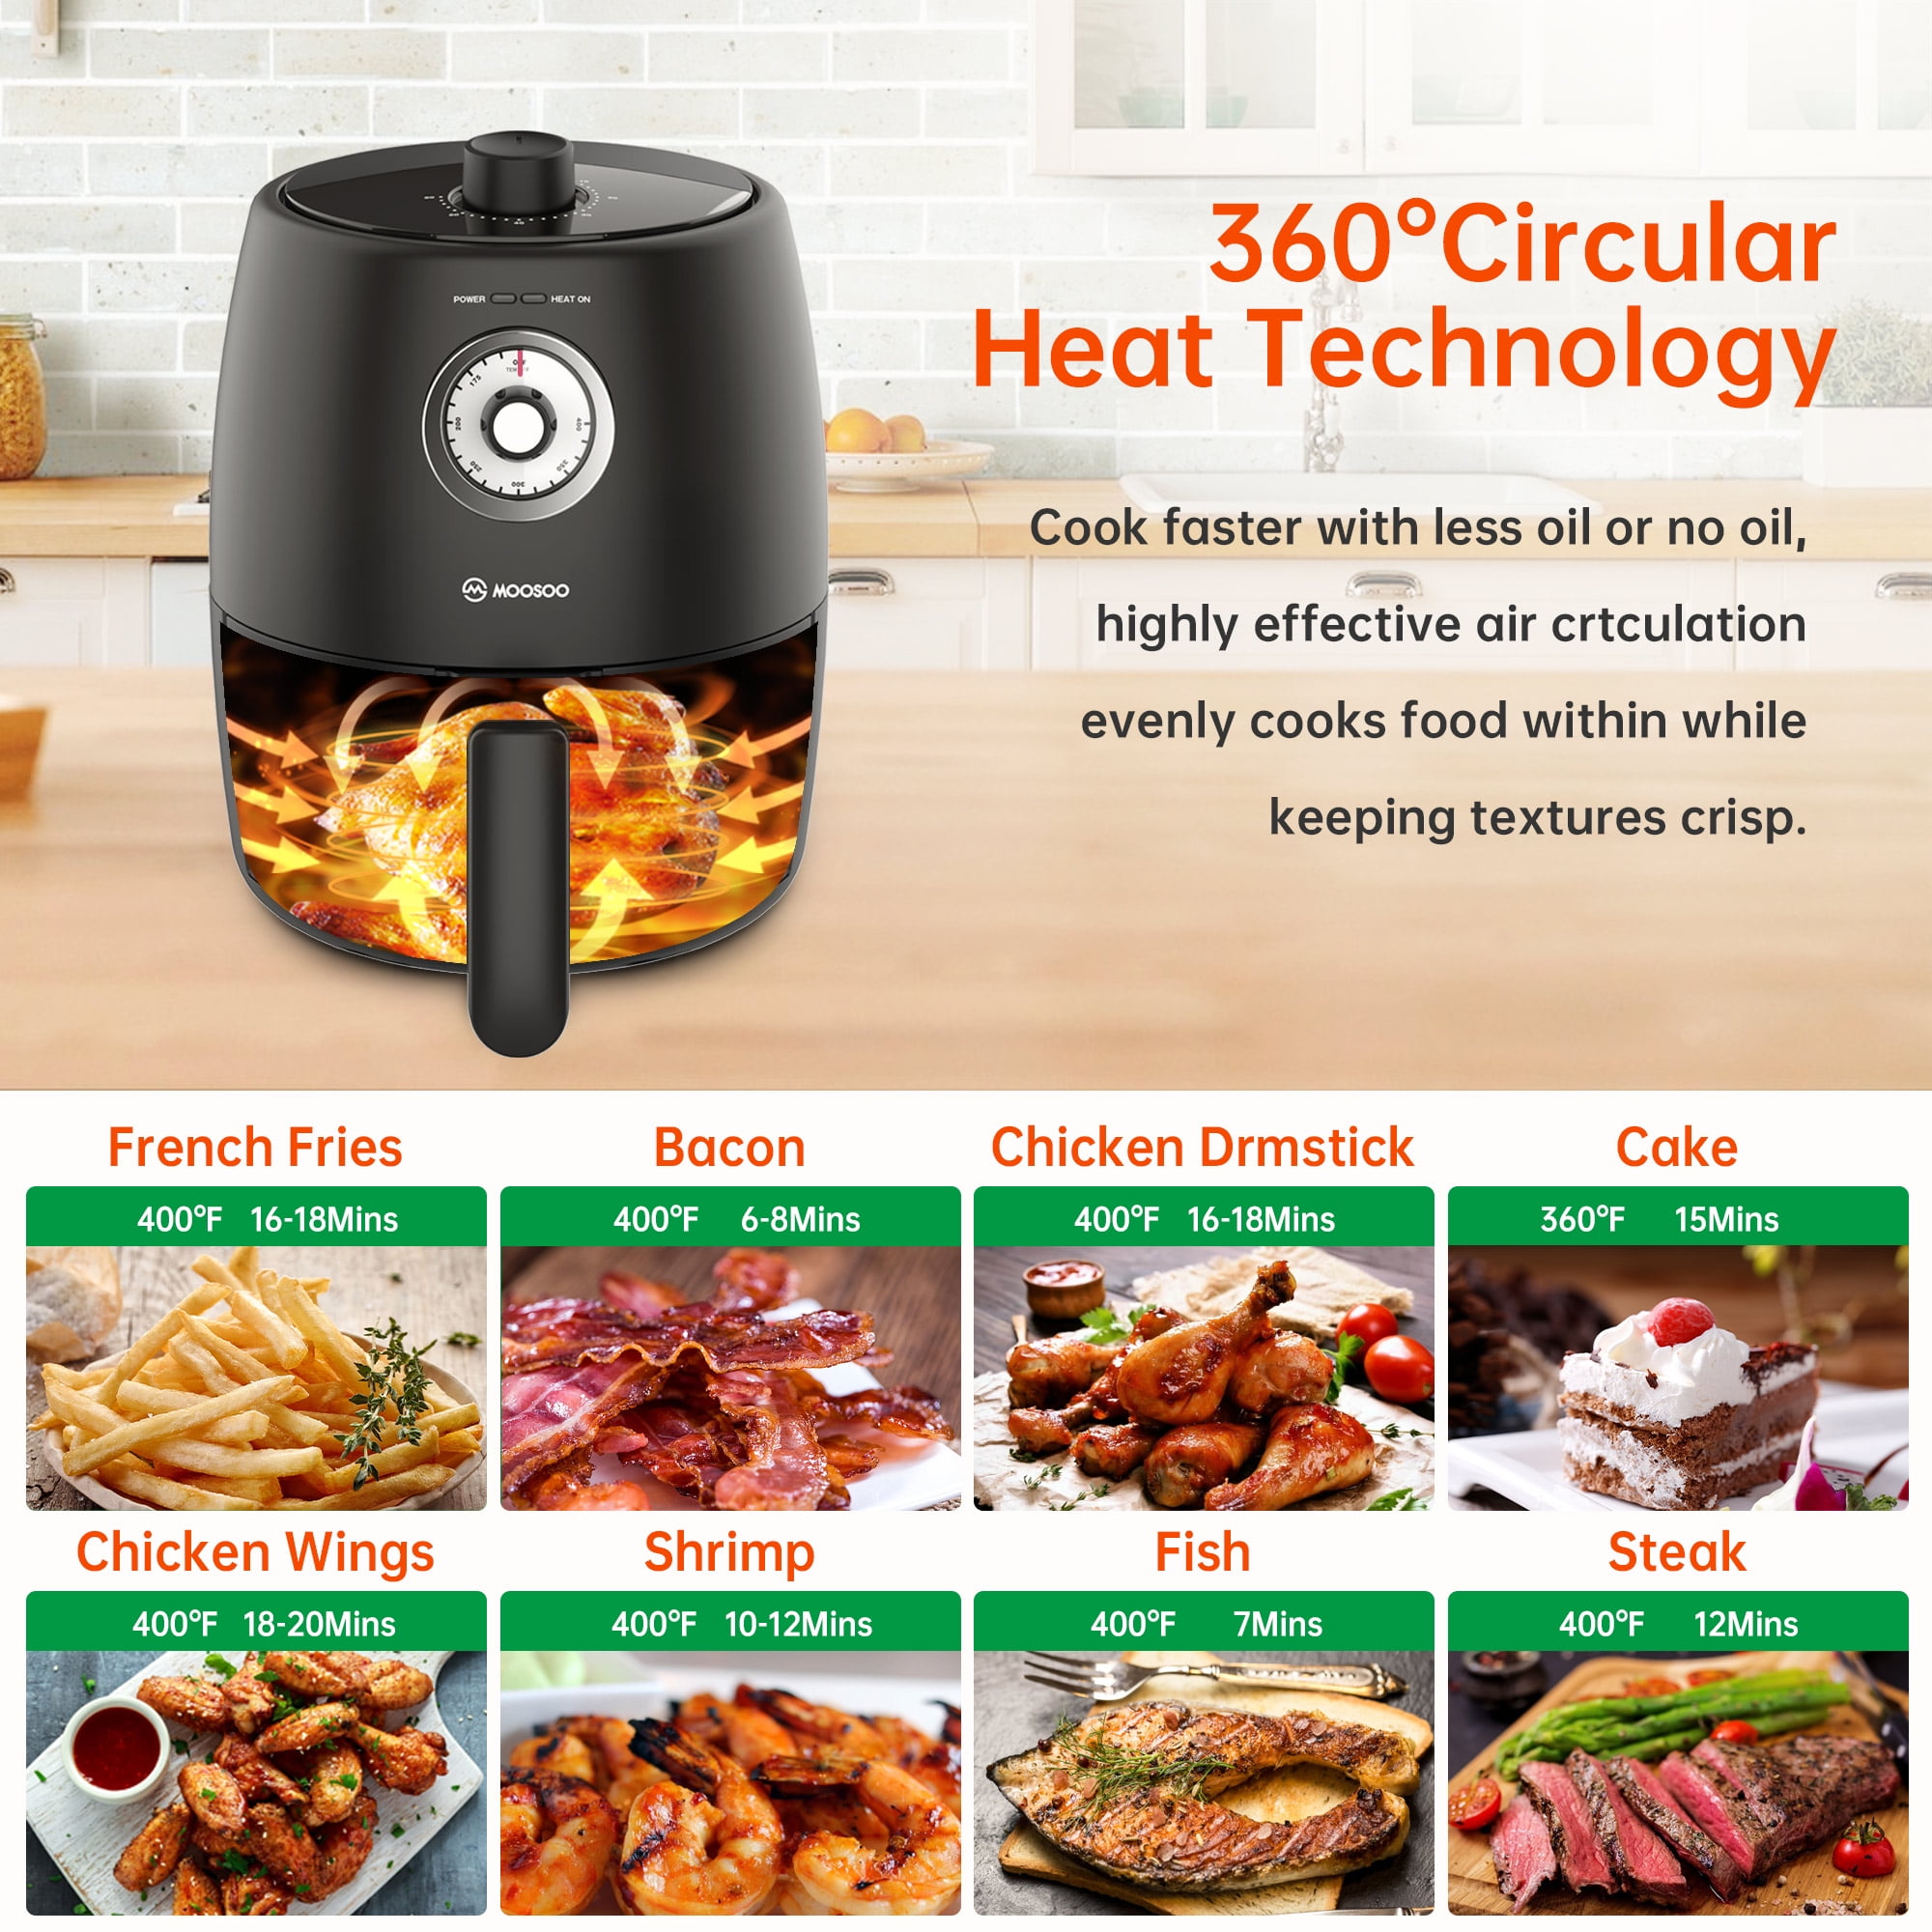 MOOSOO 2 qt. Black Air Fryer for 1-2 People with Timer, Temperature  Controls, Recipe Book, and 50 Pieces Paper Liner, 1200-Watt - Yahoo Shopping